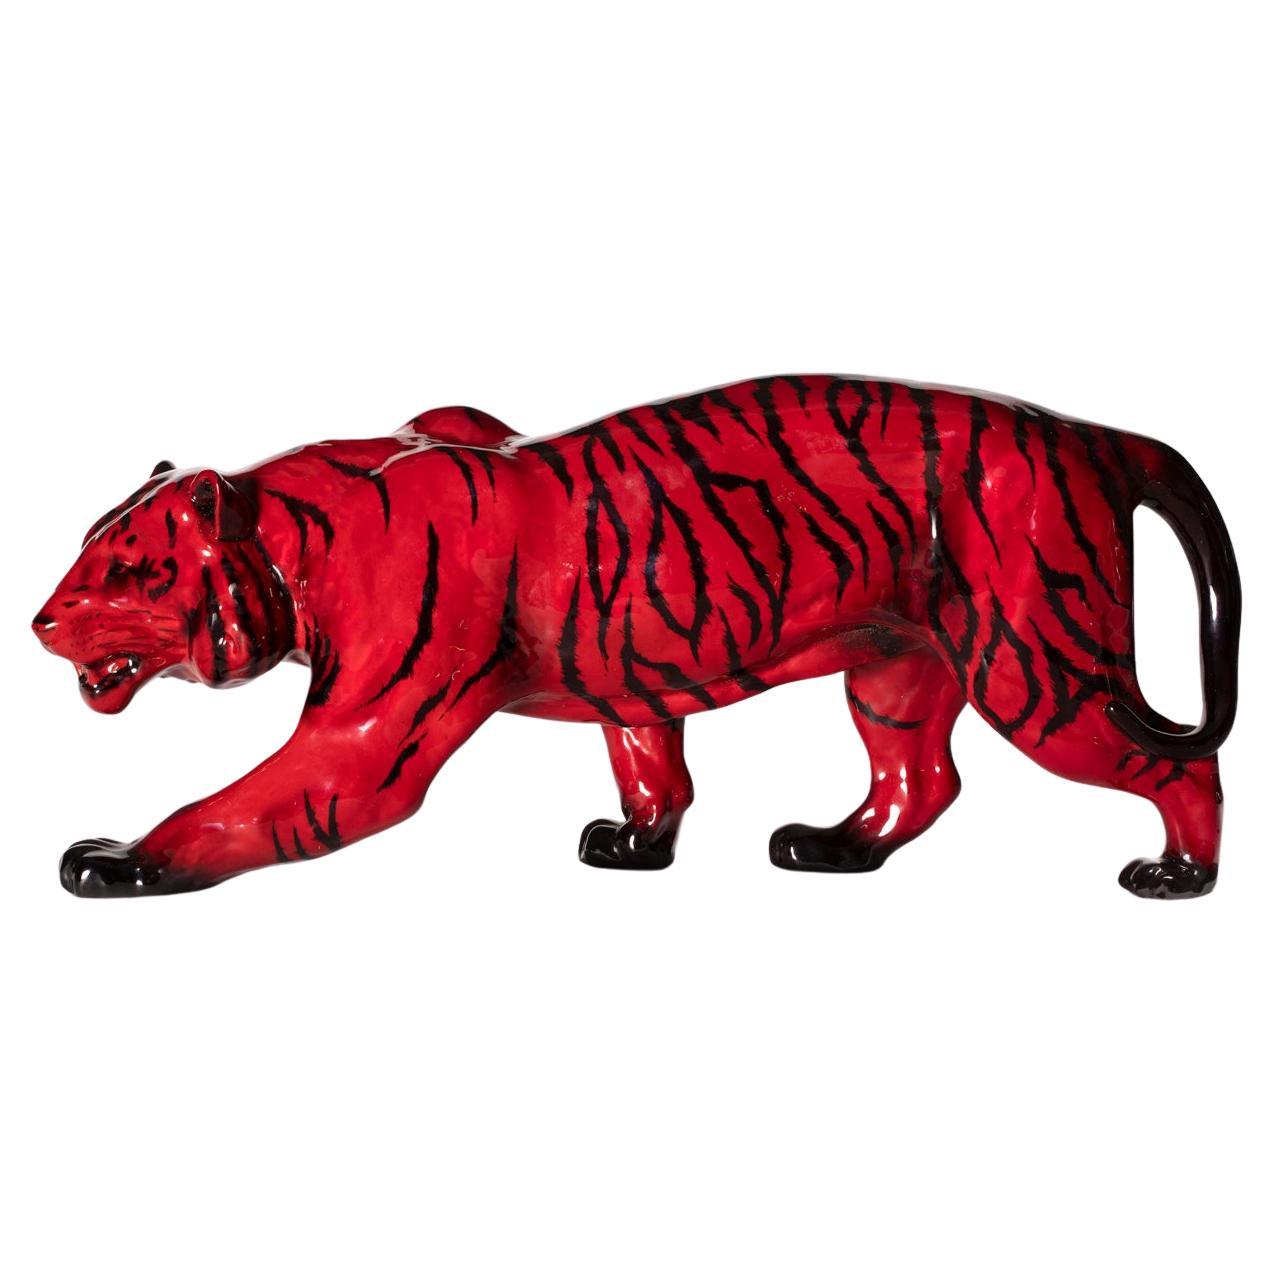 Royal Doulton Red Flambe Porcelain Figurine "TIGER" For Sale